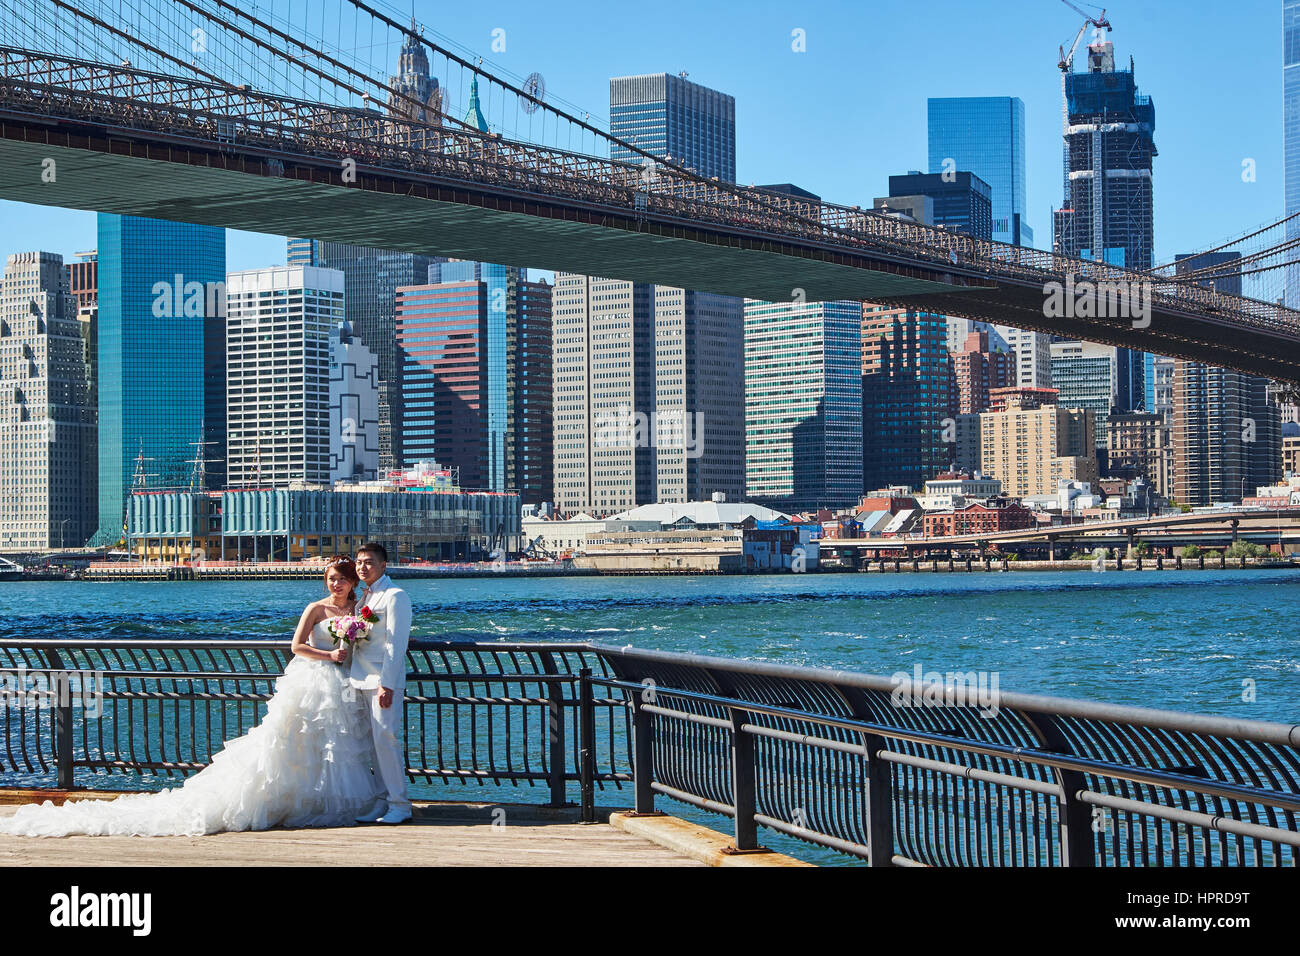 DUMBO, NEW YORK - SEPTEMBER 25, 2016: Wedding couple standing on a pier at Dumbo in Brooklyn, with Brooklyn Bridge in the background Stock Photo